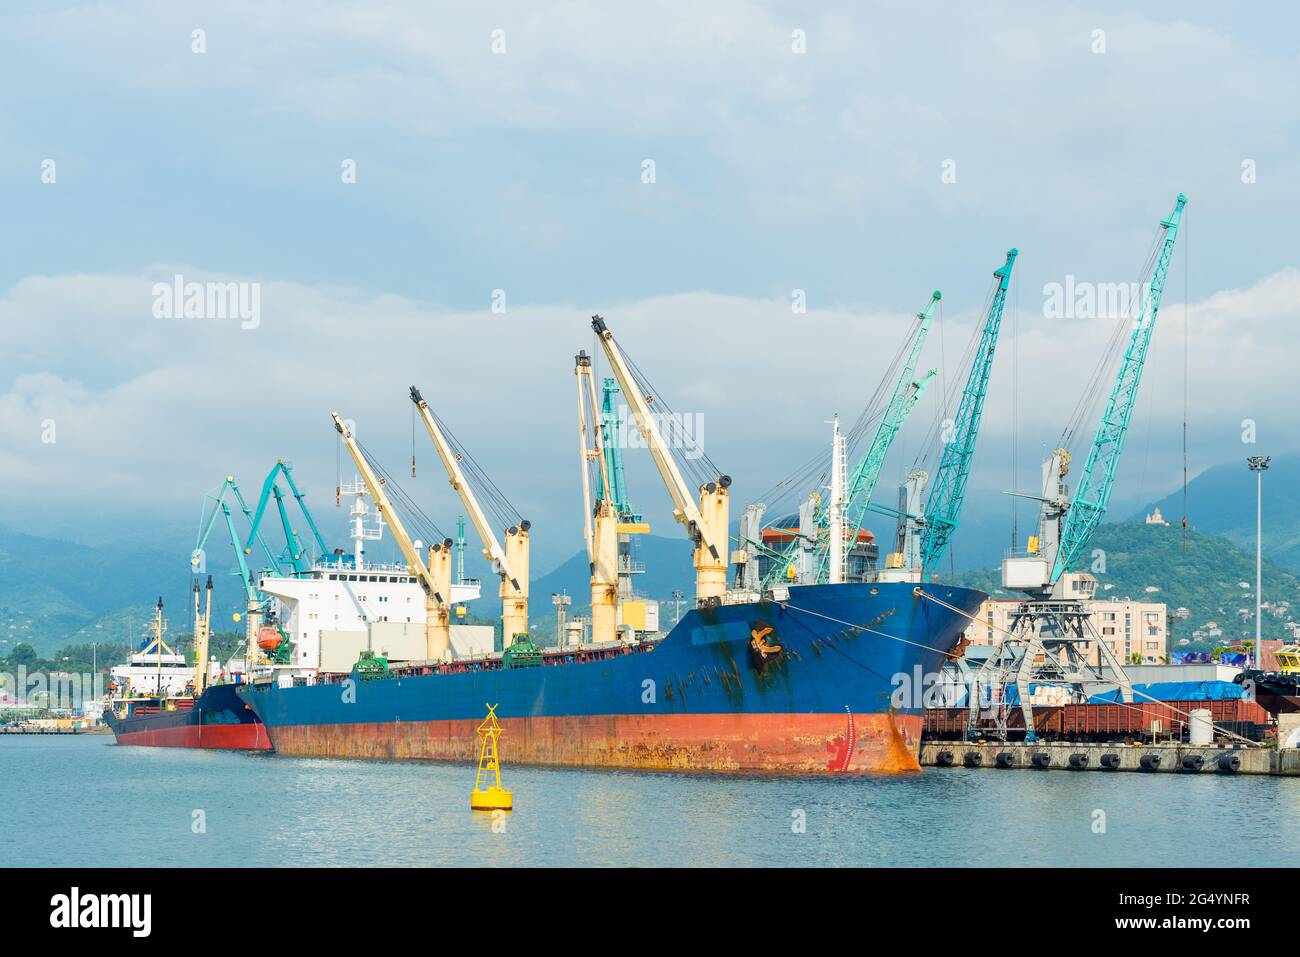 Cargo ship and cargo cranes in the port of a large city at sea Stock Photo